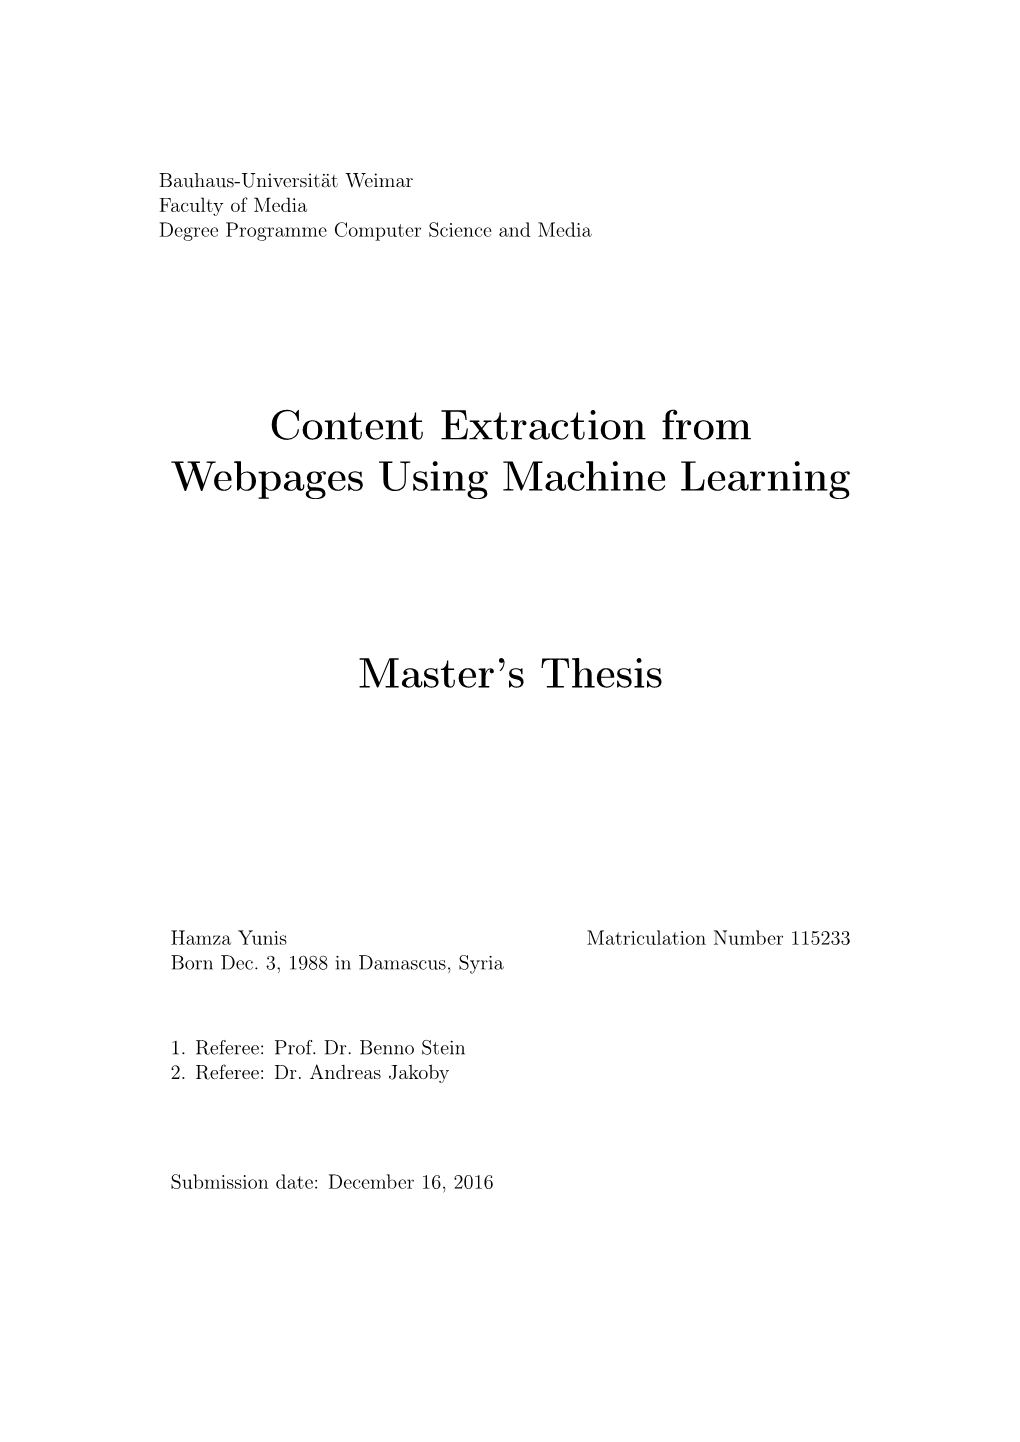 Content Extraction from Webpages Using Machine Learning